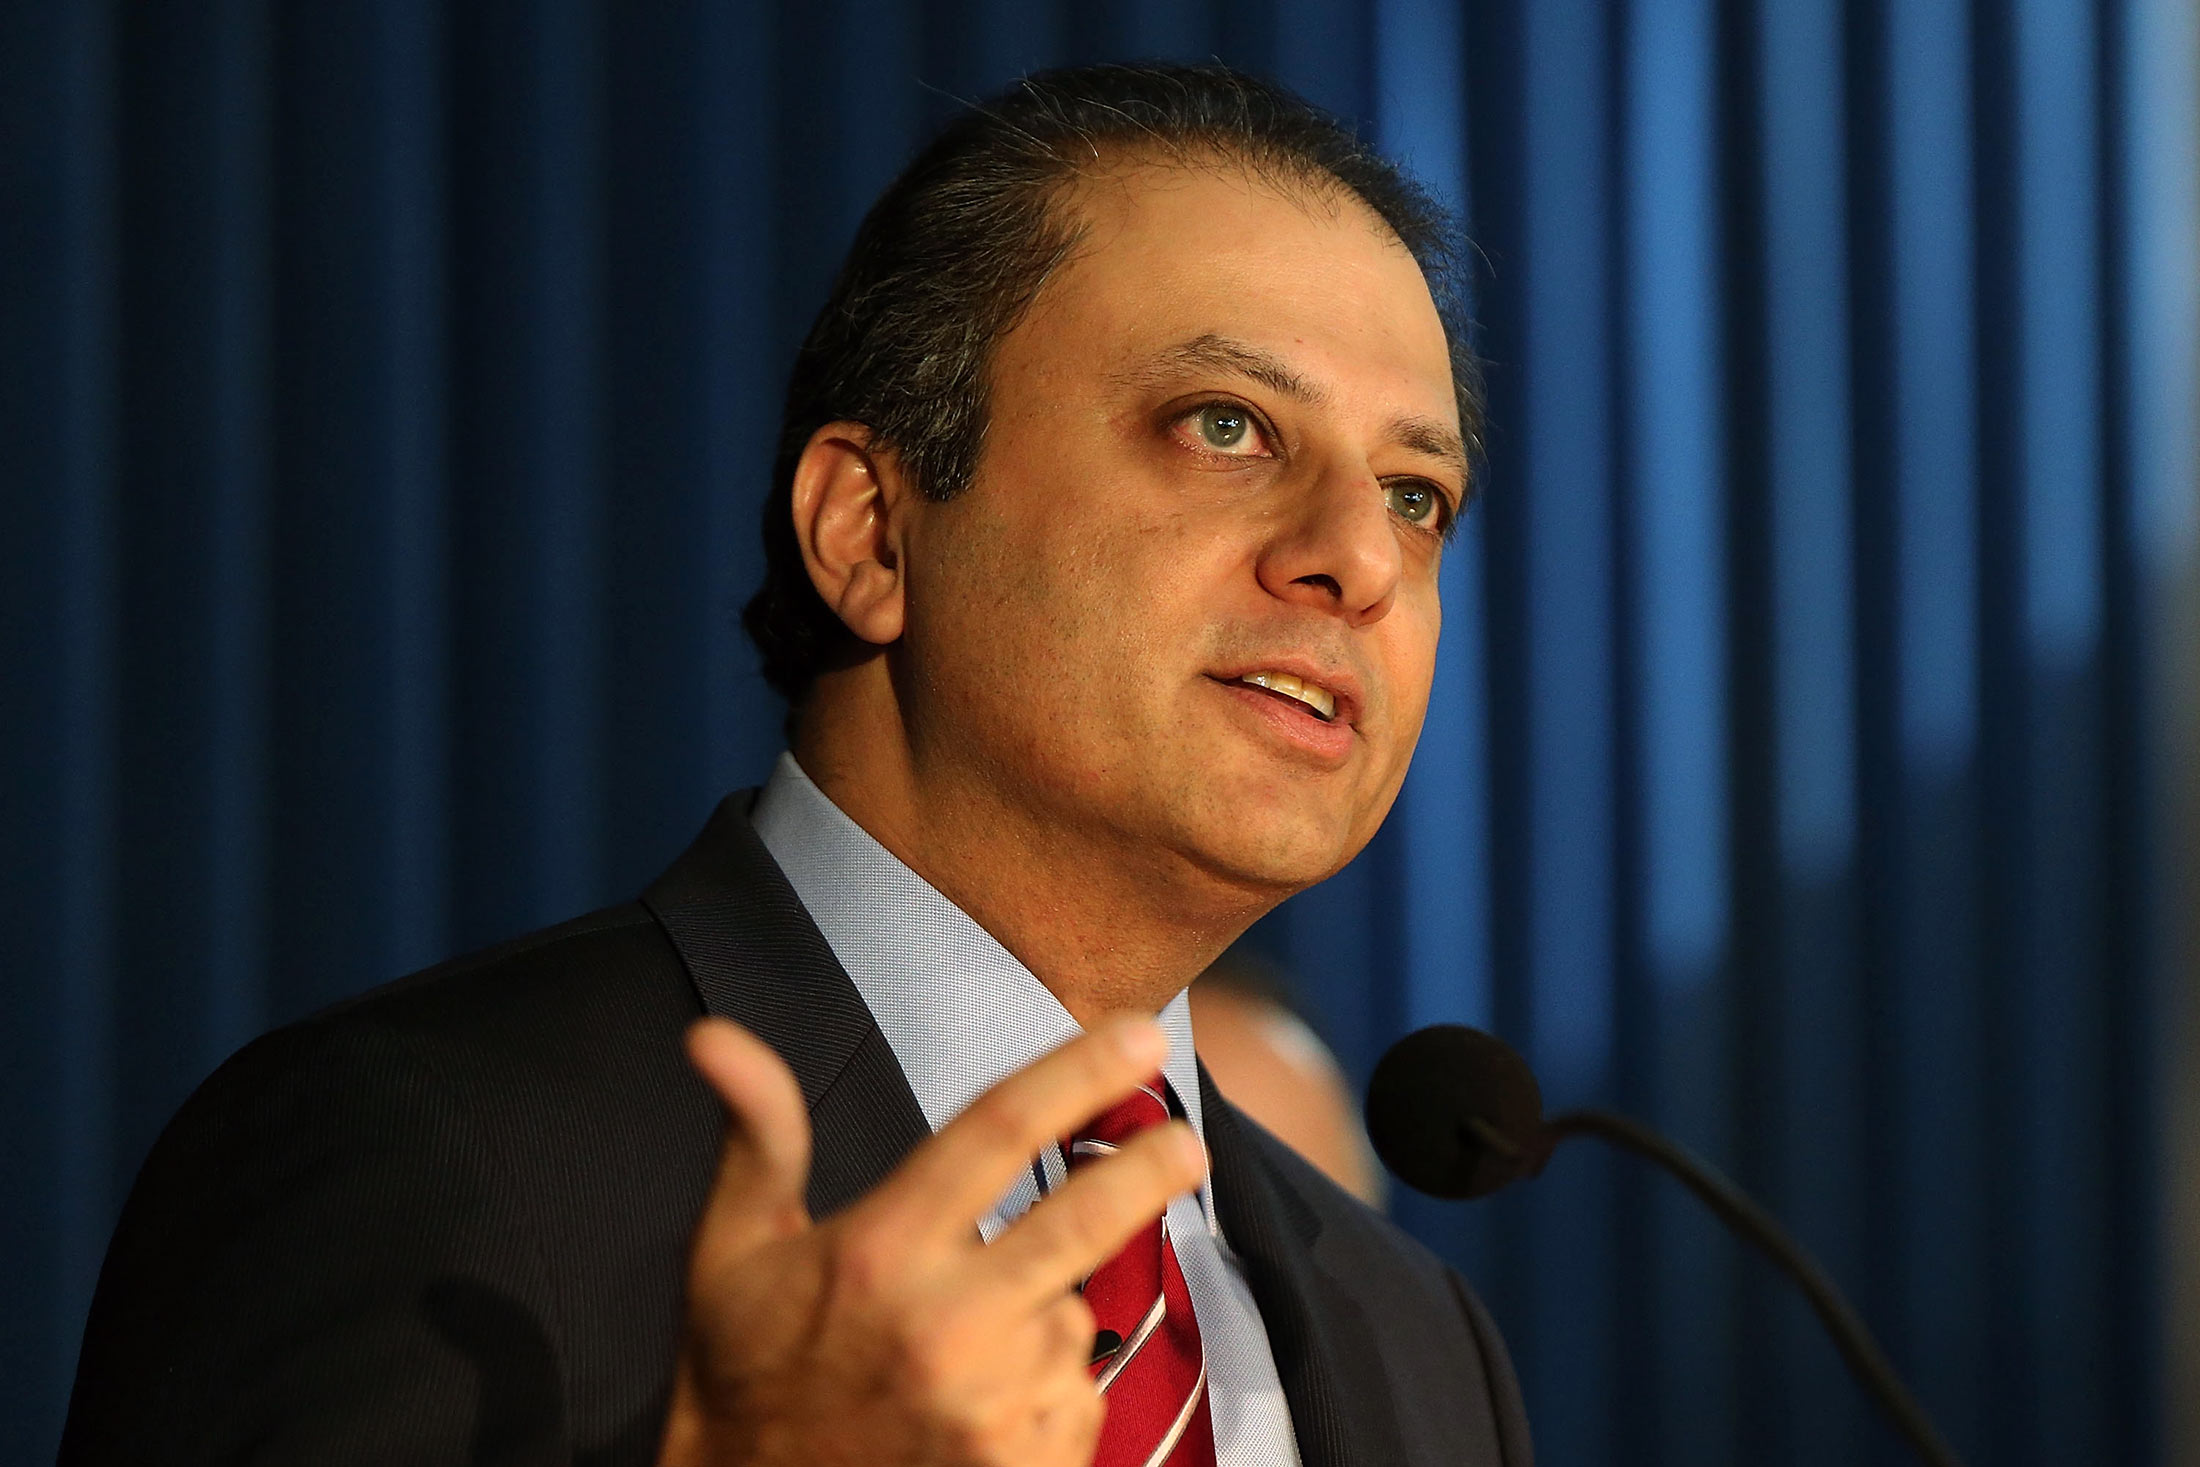 Preet Bharara, U.S. Attorney for the Southern District of New York.
